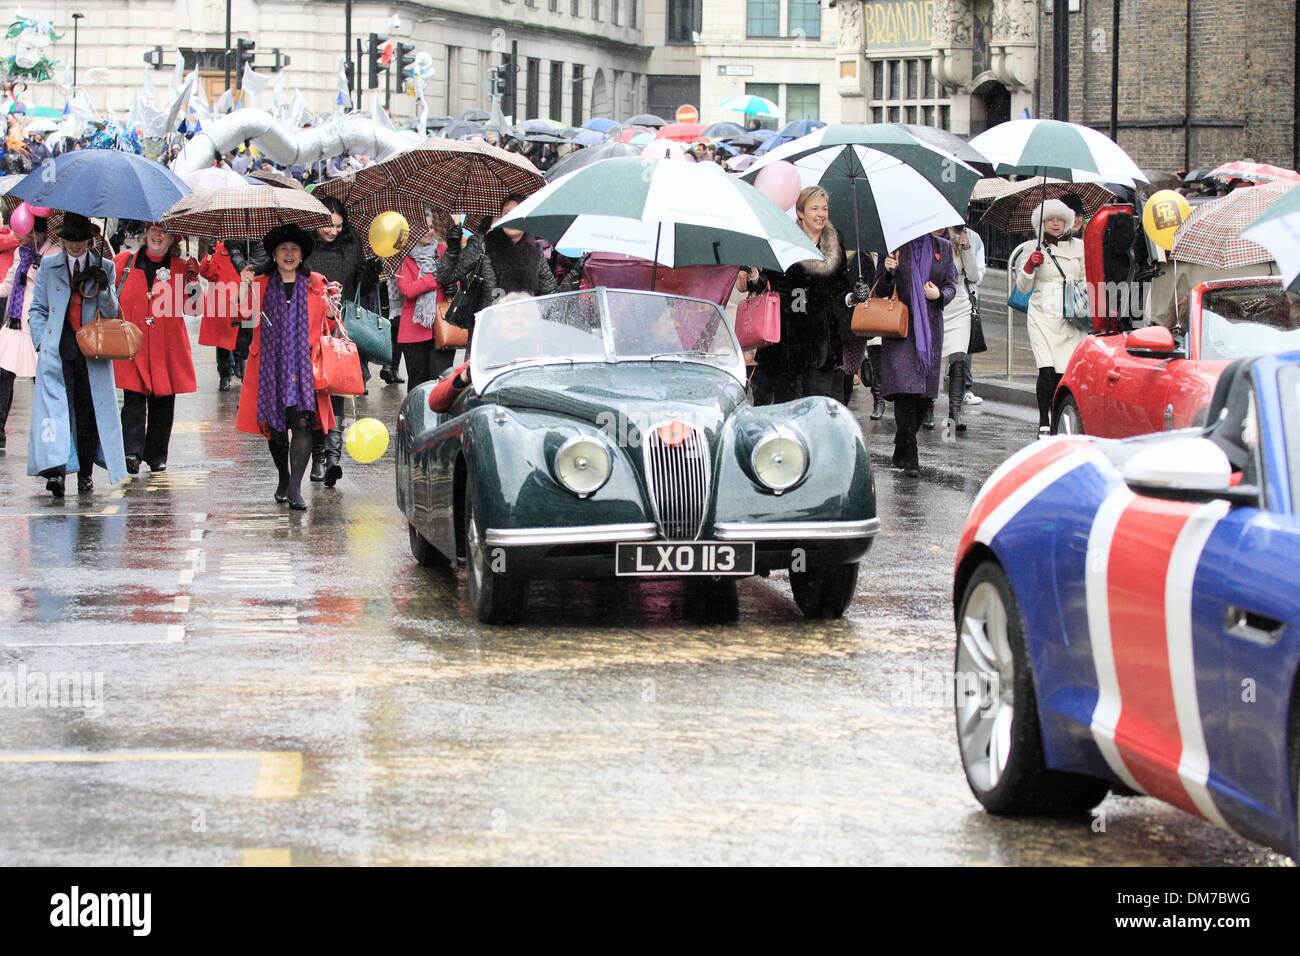 Part of the 'Ladies in the city and Livery'  float taking part in the 2013 Lord Mayor's Show in London on a rainy November day Stock Photo